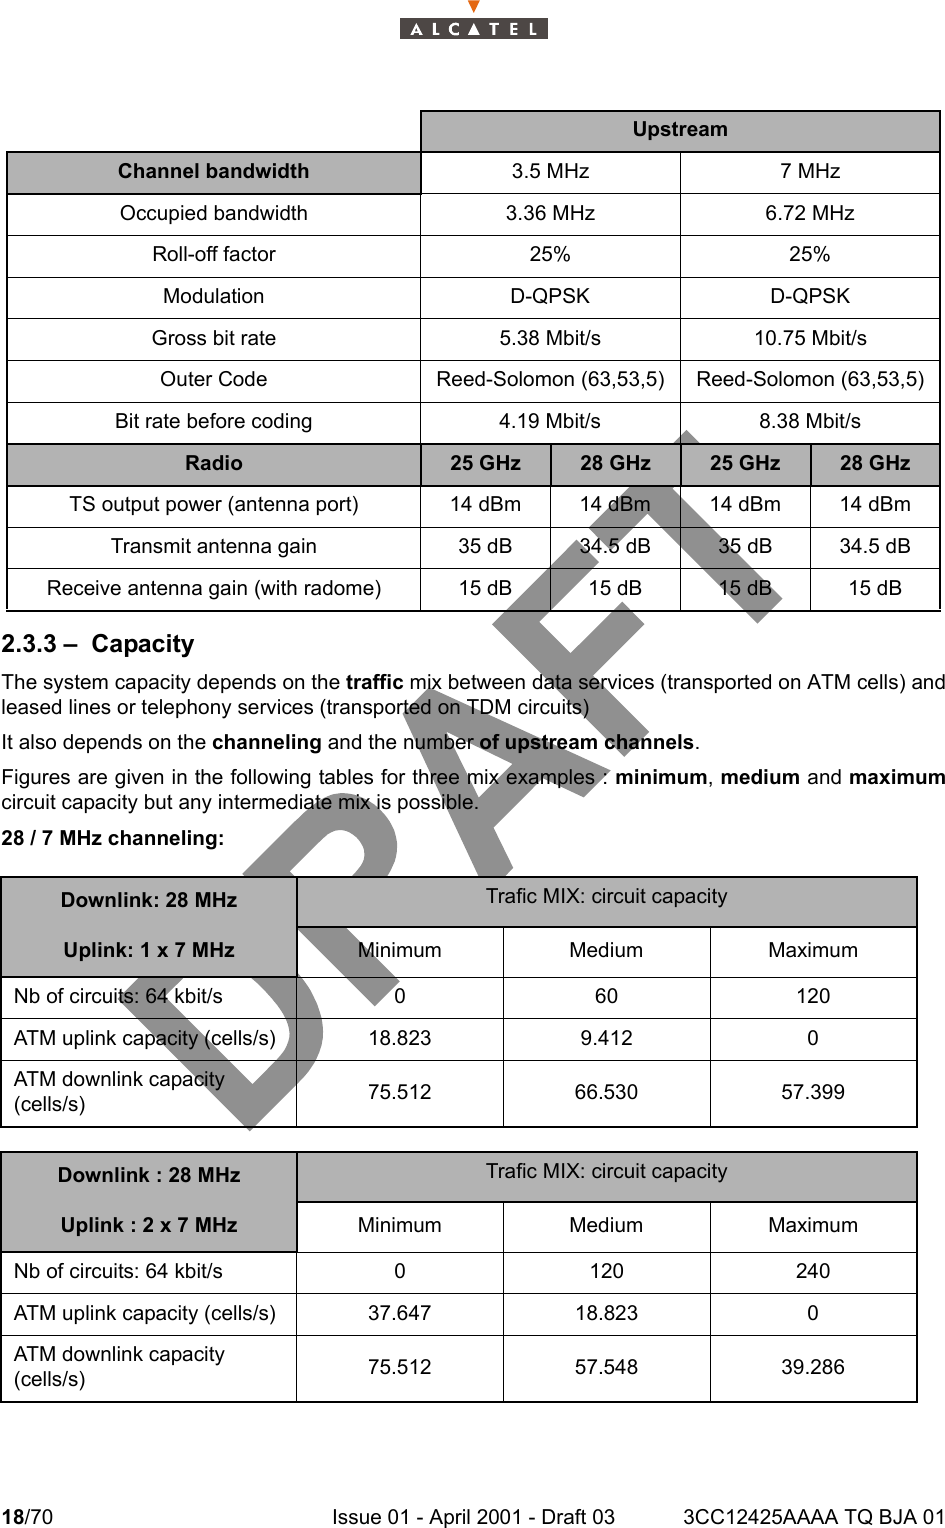 18/70 Issue 01 - April 2001 - Draft 03 3CC12425AAAA TQ BJA 01242.3.3 – CapacityThe system capacity depends on the traffic mix between data services (transported on ATM cells) andleased lines or telephony services (transported on TDM circuits)It also depends on the channeling and the number of upstream channels.Figures are given in the following tables for three mix examples : minimum, medium and maximumcircuit capacity but any intermediate mix is possible.28 / 7 MHz channeling:UpstreamChannel bandwidth 3.5 MHz 7 MHzOccupied bandwidth 3.36 MHz 6.72 MHzRoll-off factor 25% 25%Modulation D-QPSK D-QPSKGross bit rate 5.38 Mbit/s 10.75 Mbit/sOuter Code Reed-Solomon (63,53,5) Reed-Solomon (63,53,5)Bit rate before coding 4.19 Mbit/s 8.38 Mbit/sRadio 25 GHz 28 GHz 25 GHz 28 GHzTS output power (antenna port) 14 dBm 14 dBm 14 dBm 14 dBmTransmit antenna gain 35 dB 34.5 dB 35 dB 34.5 dBReceive antenna gain (with radome) 15 dB 15 dB 15 dB 15 dBDownlink: 28 MHz Trafic MIX: circuit capacityUplink: 1 x 7 MHz Minimum Medium MaximumNb of circuits: 64 kbit/s 0 60 120ATM uplink capacity (cells/s) 18.823 9.412 0ATM downlink capacity (cells/s) 75.512 66.530 57.399Downlink : 28 MHz Trafic MIX: circuit capacityUplink : 2 x 7 MHz Minimum Medium MaximumNb of circuits: 64 kbit/s 0 120 240ATM uplink capacity (cells/s) 37.647 18.823 0ATM downlink capacity (cells/s) 75.512 57.548 39.286